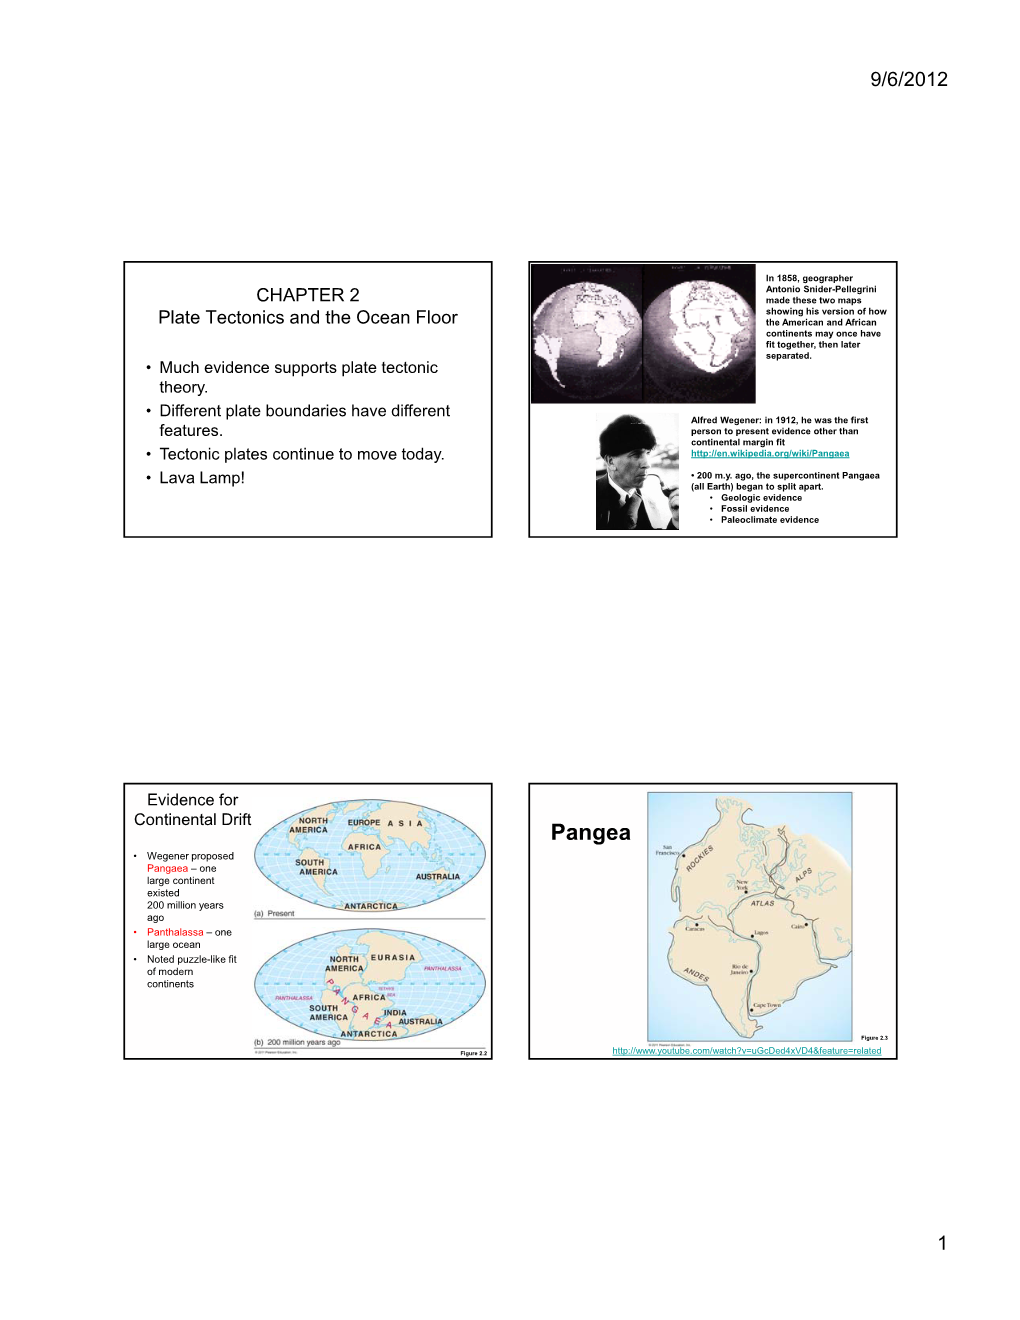 Pangea • Wegener Proposed Pangaea – One Large Continent Existed 200 Million Years Ago • Panthalassa – One Large Ocean • Noted Puzzle-Like Fit of Modern Continents